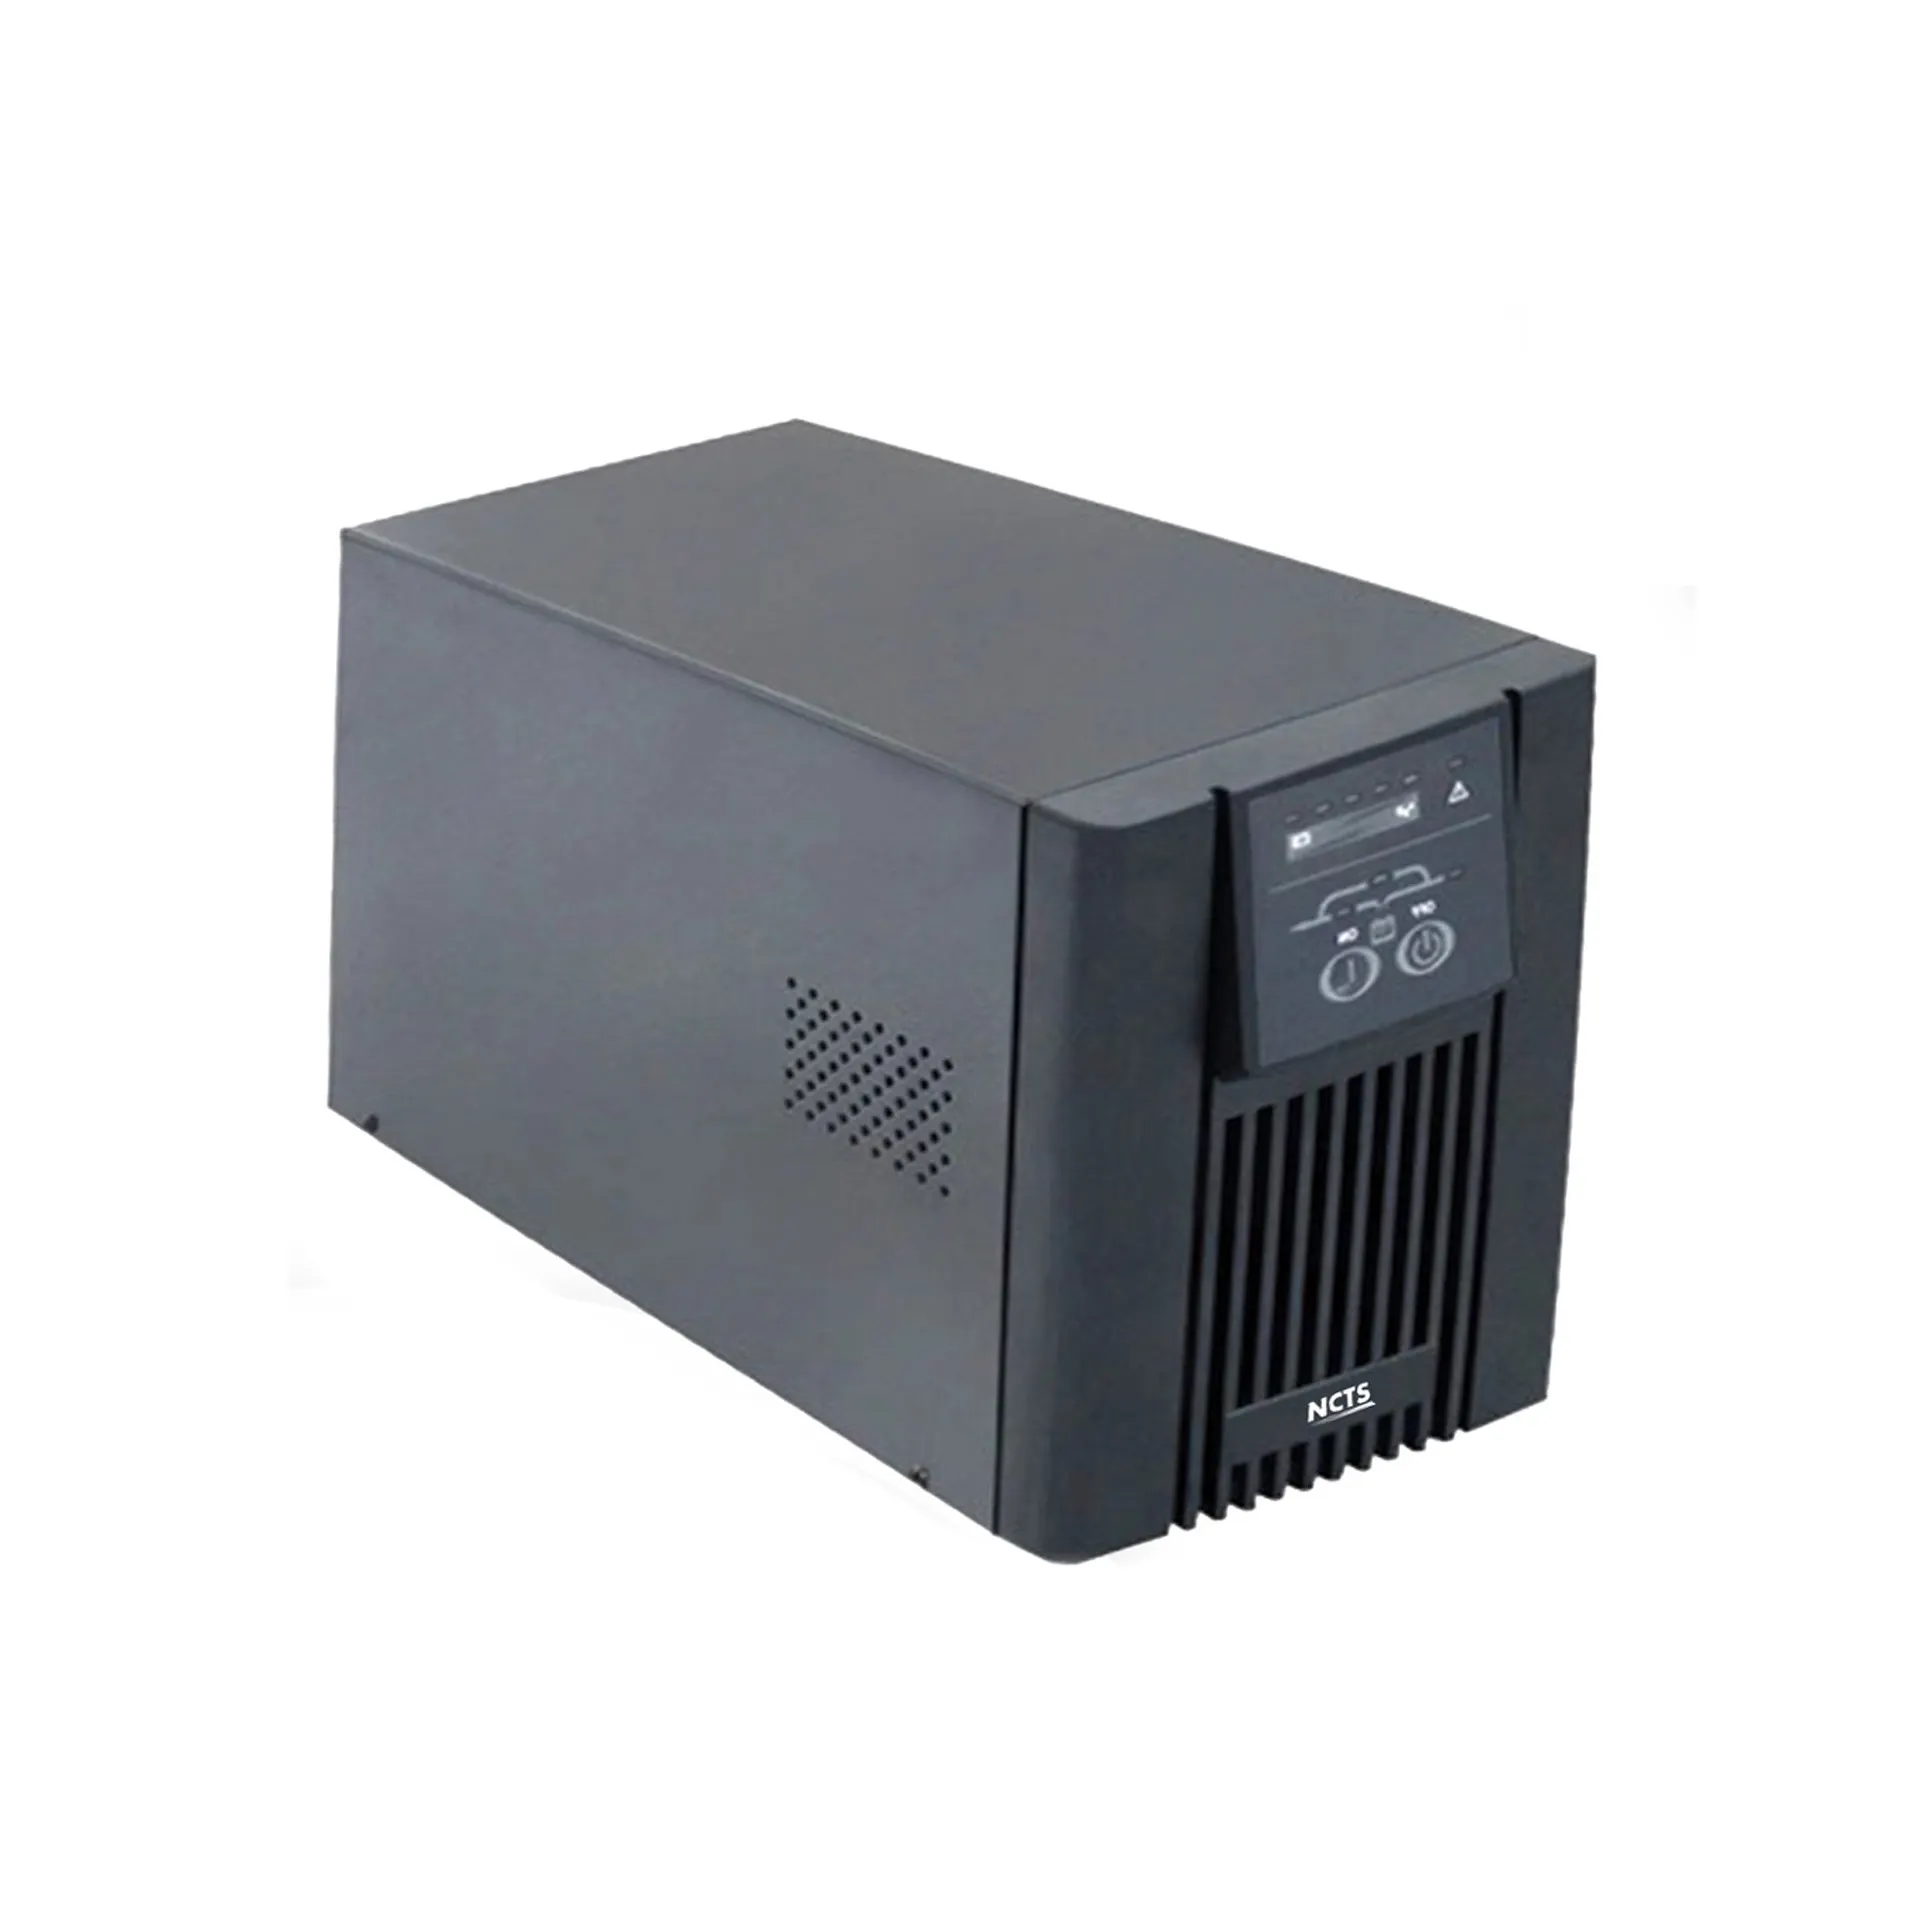 New Style Lower Price Recargable Portable Ups Power Supply Ups Flexible Operation Ups